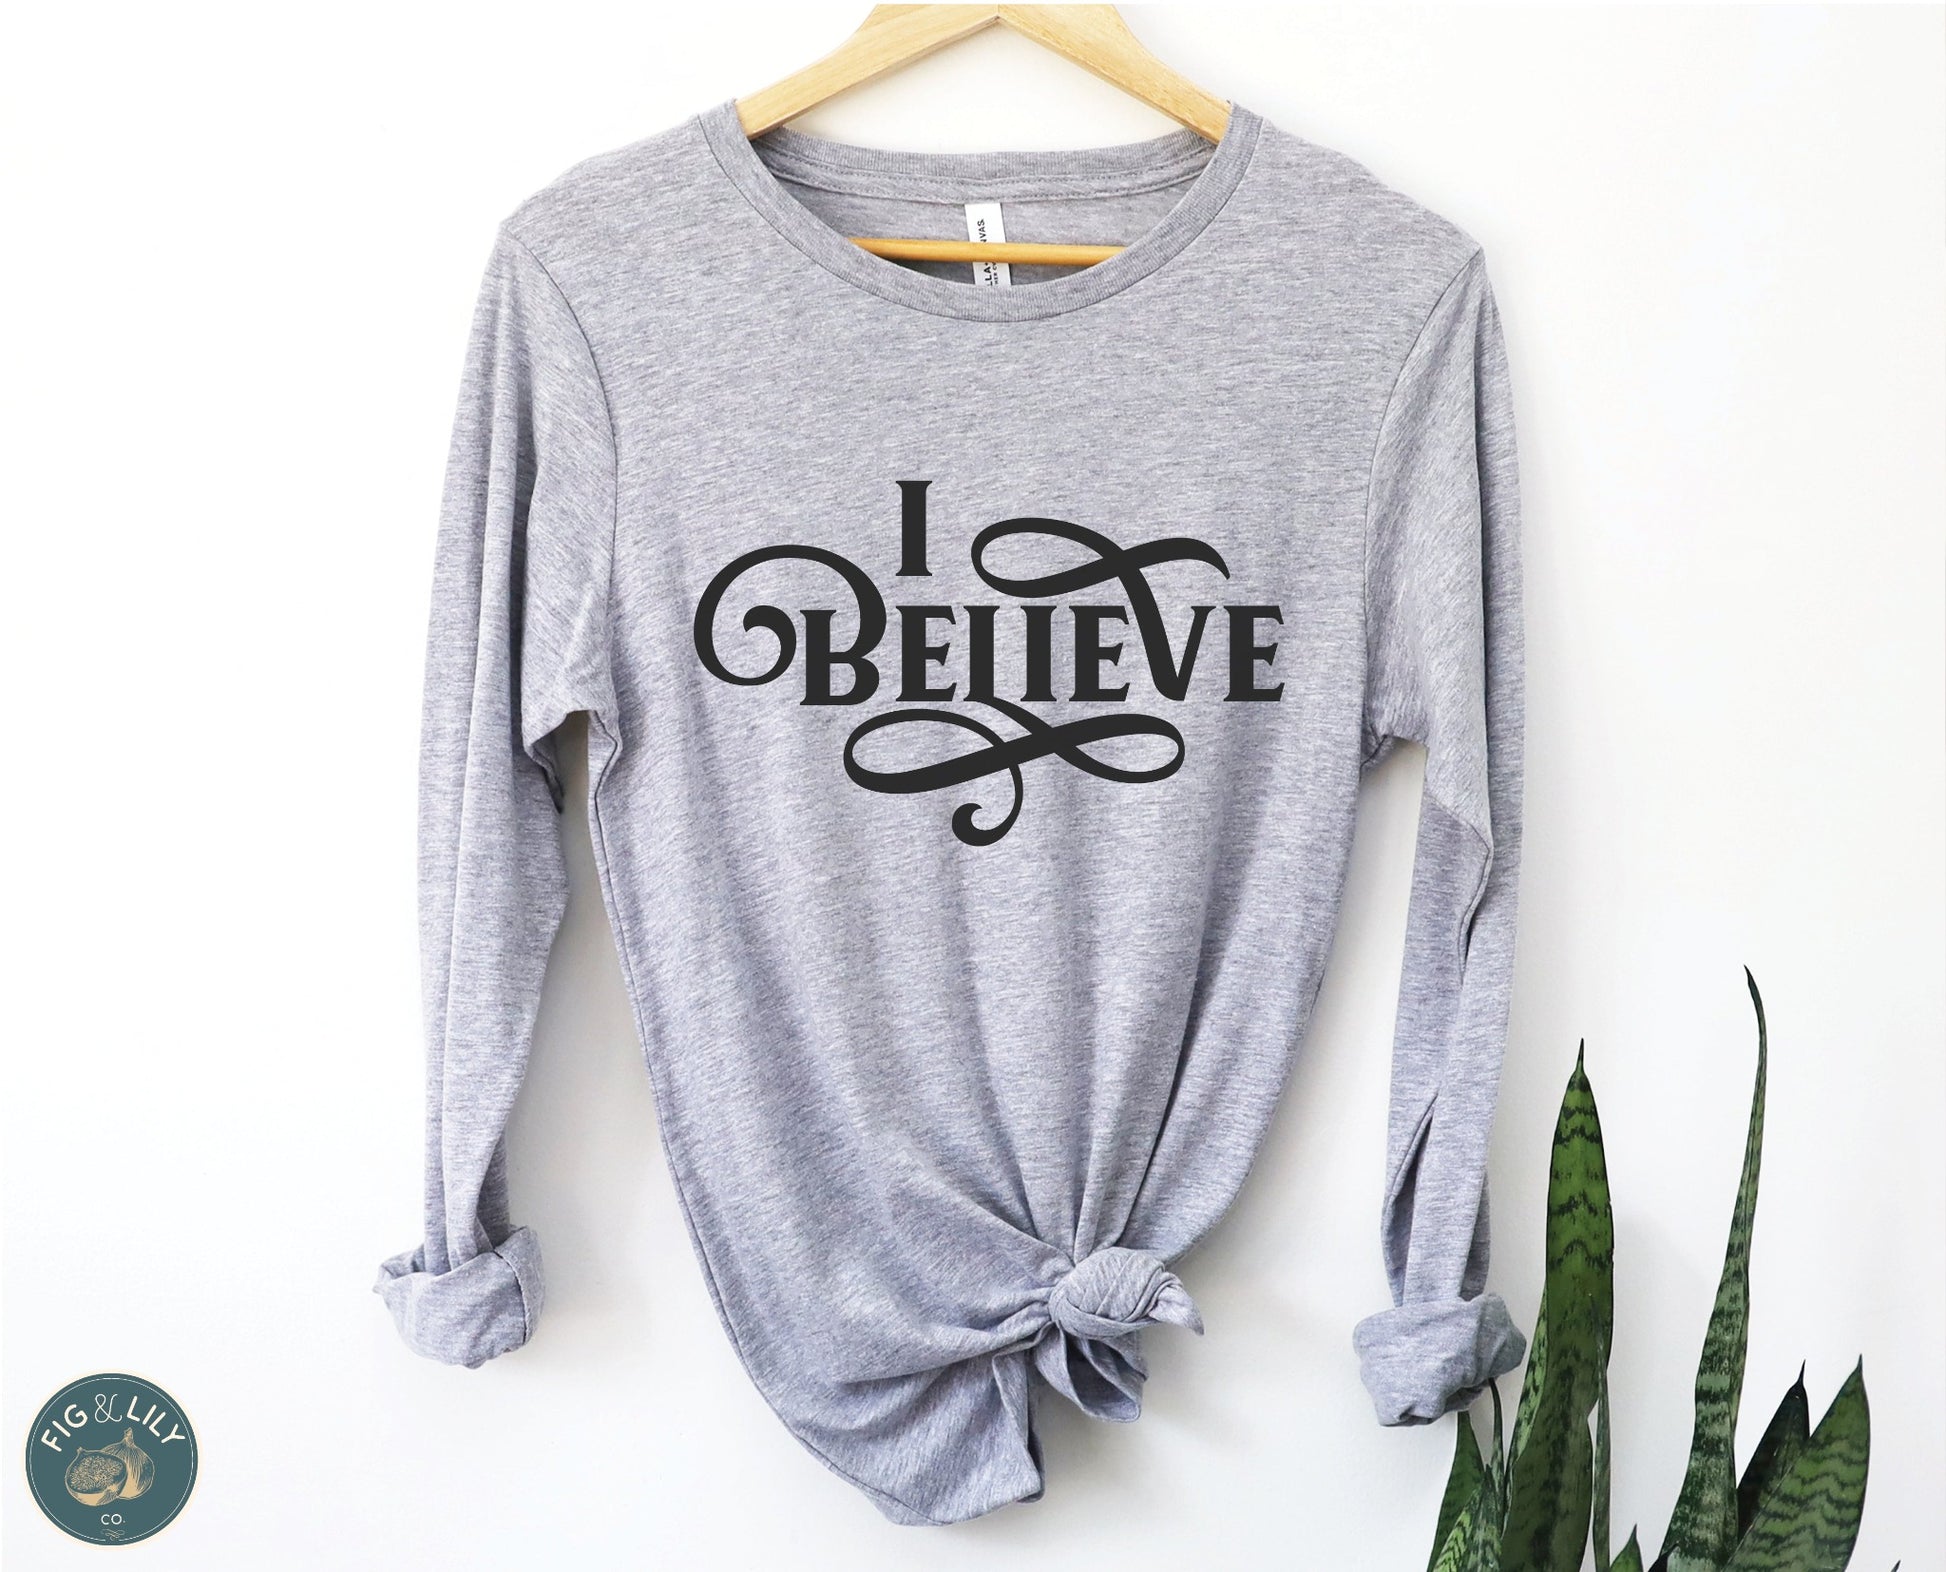 I Believe Swirl Christian aesthetic faith statement design printed in black on soft athletic heather gray long sleeve tee for women